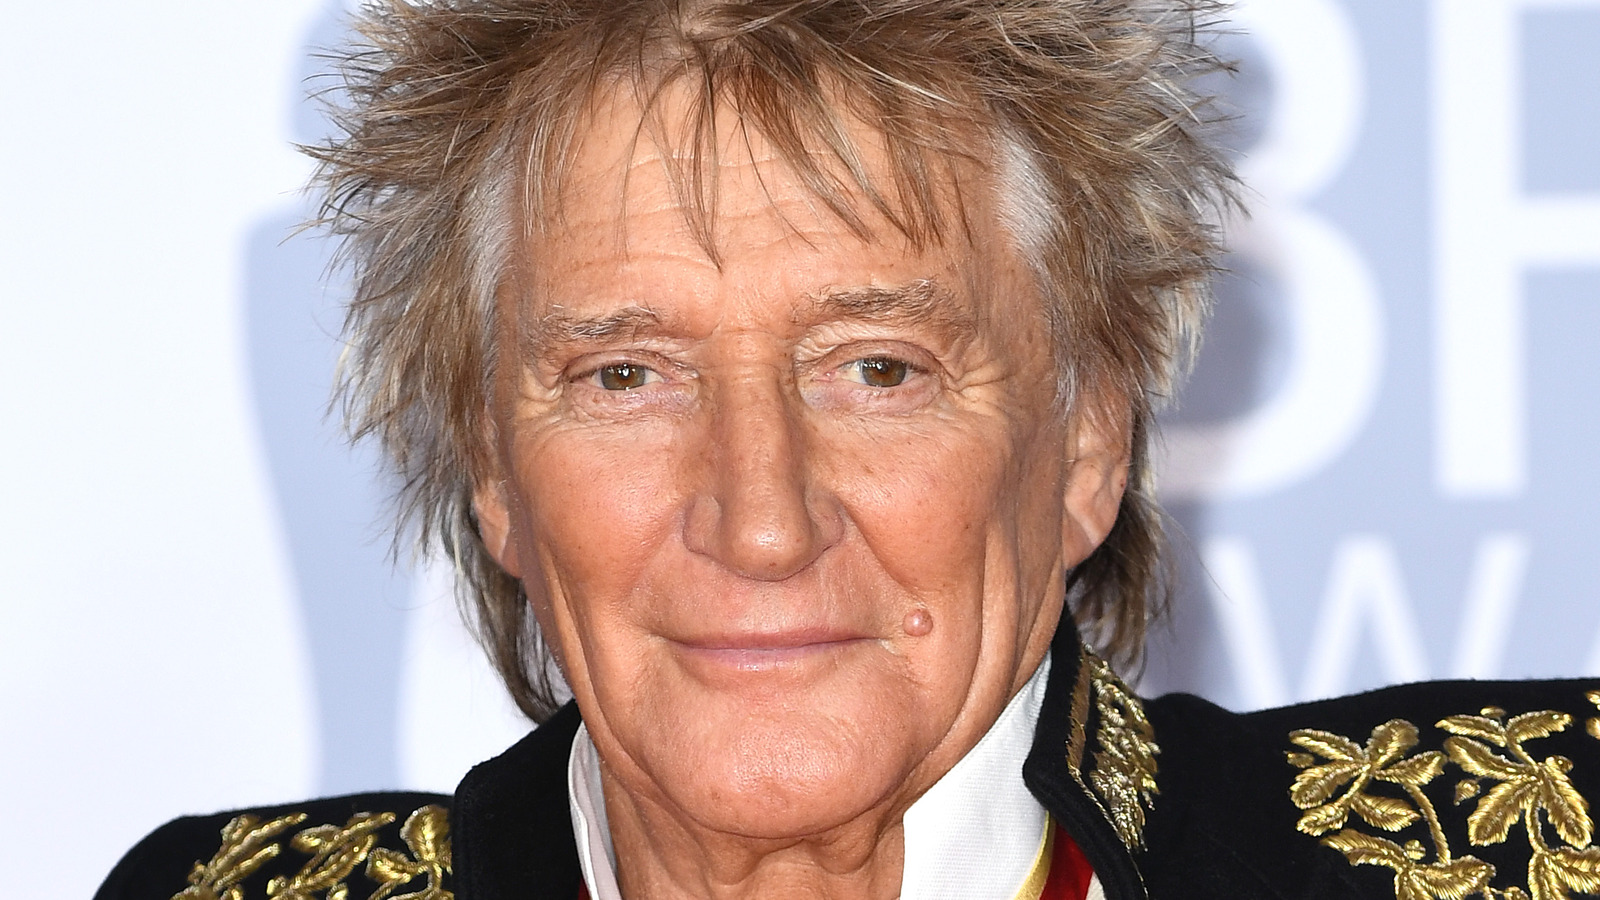 Rod Stewart's Unlikely Friendship With Donald Trump Turned Rocky